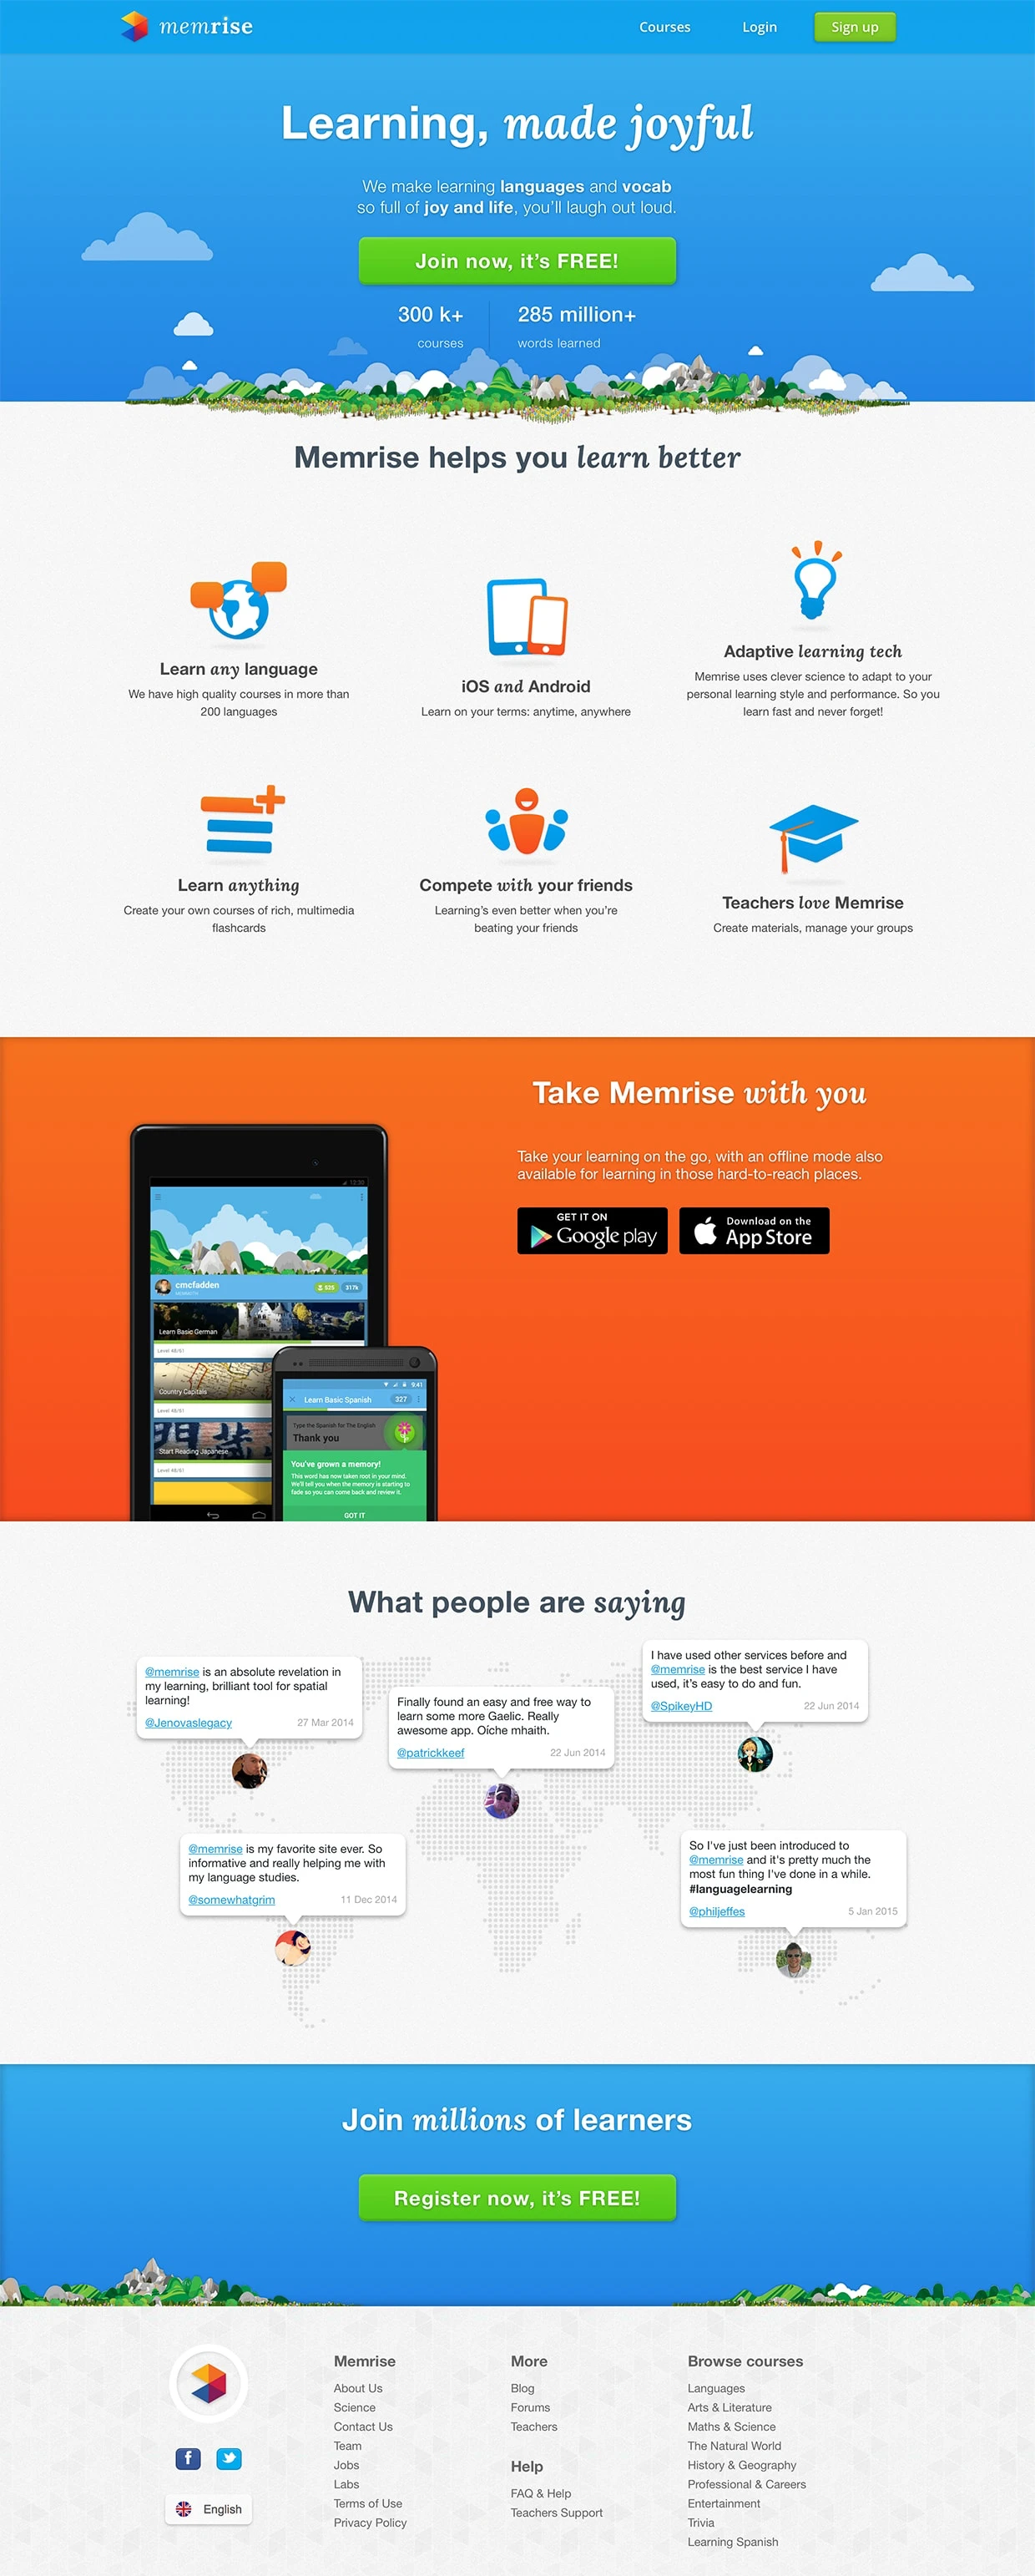 Memrise Landing Page Example: The Memrise community uses images and science to make learning easy and fun. Learn a language. Learn anything.